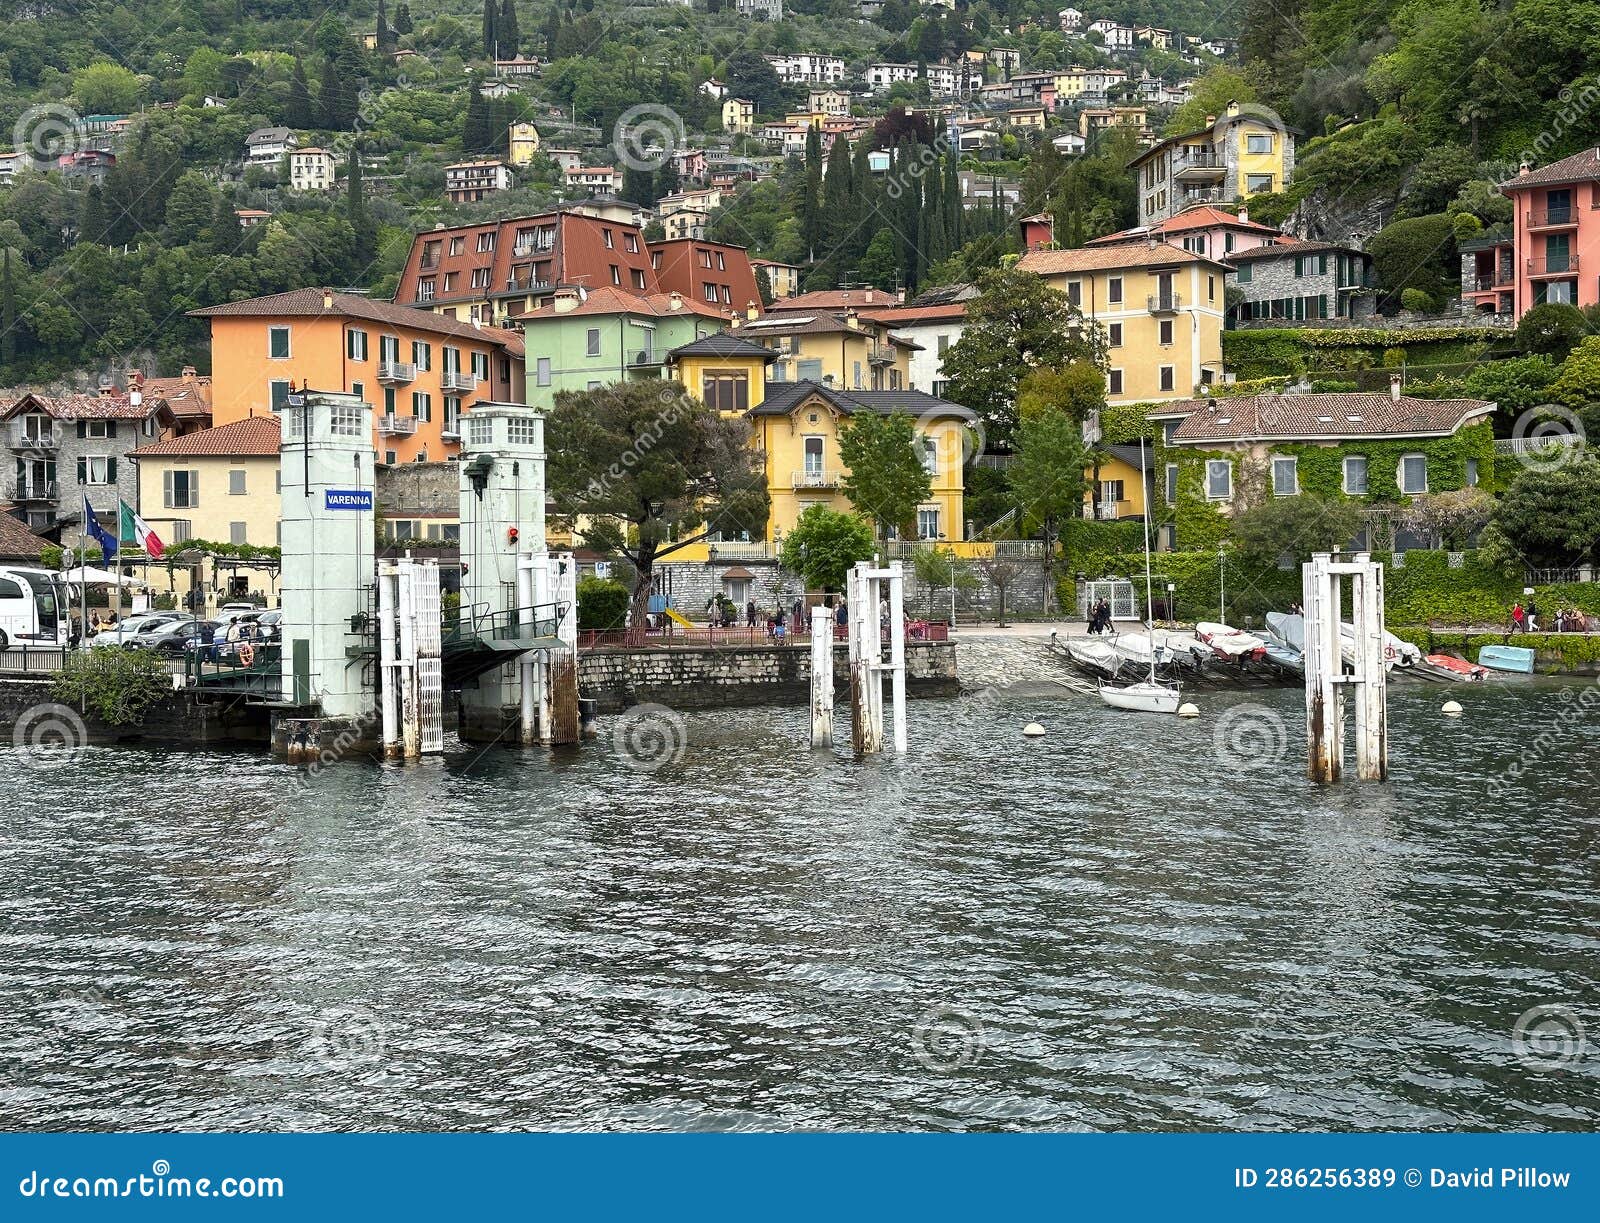 empty boat dock at varenna on lake como photographed from an approaching ferry of the navigazione laghi